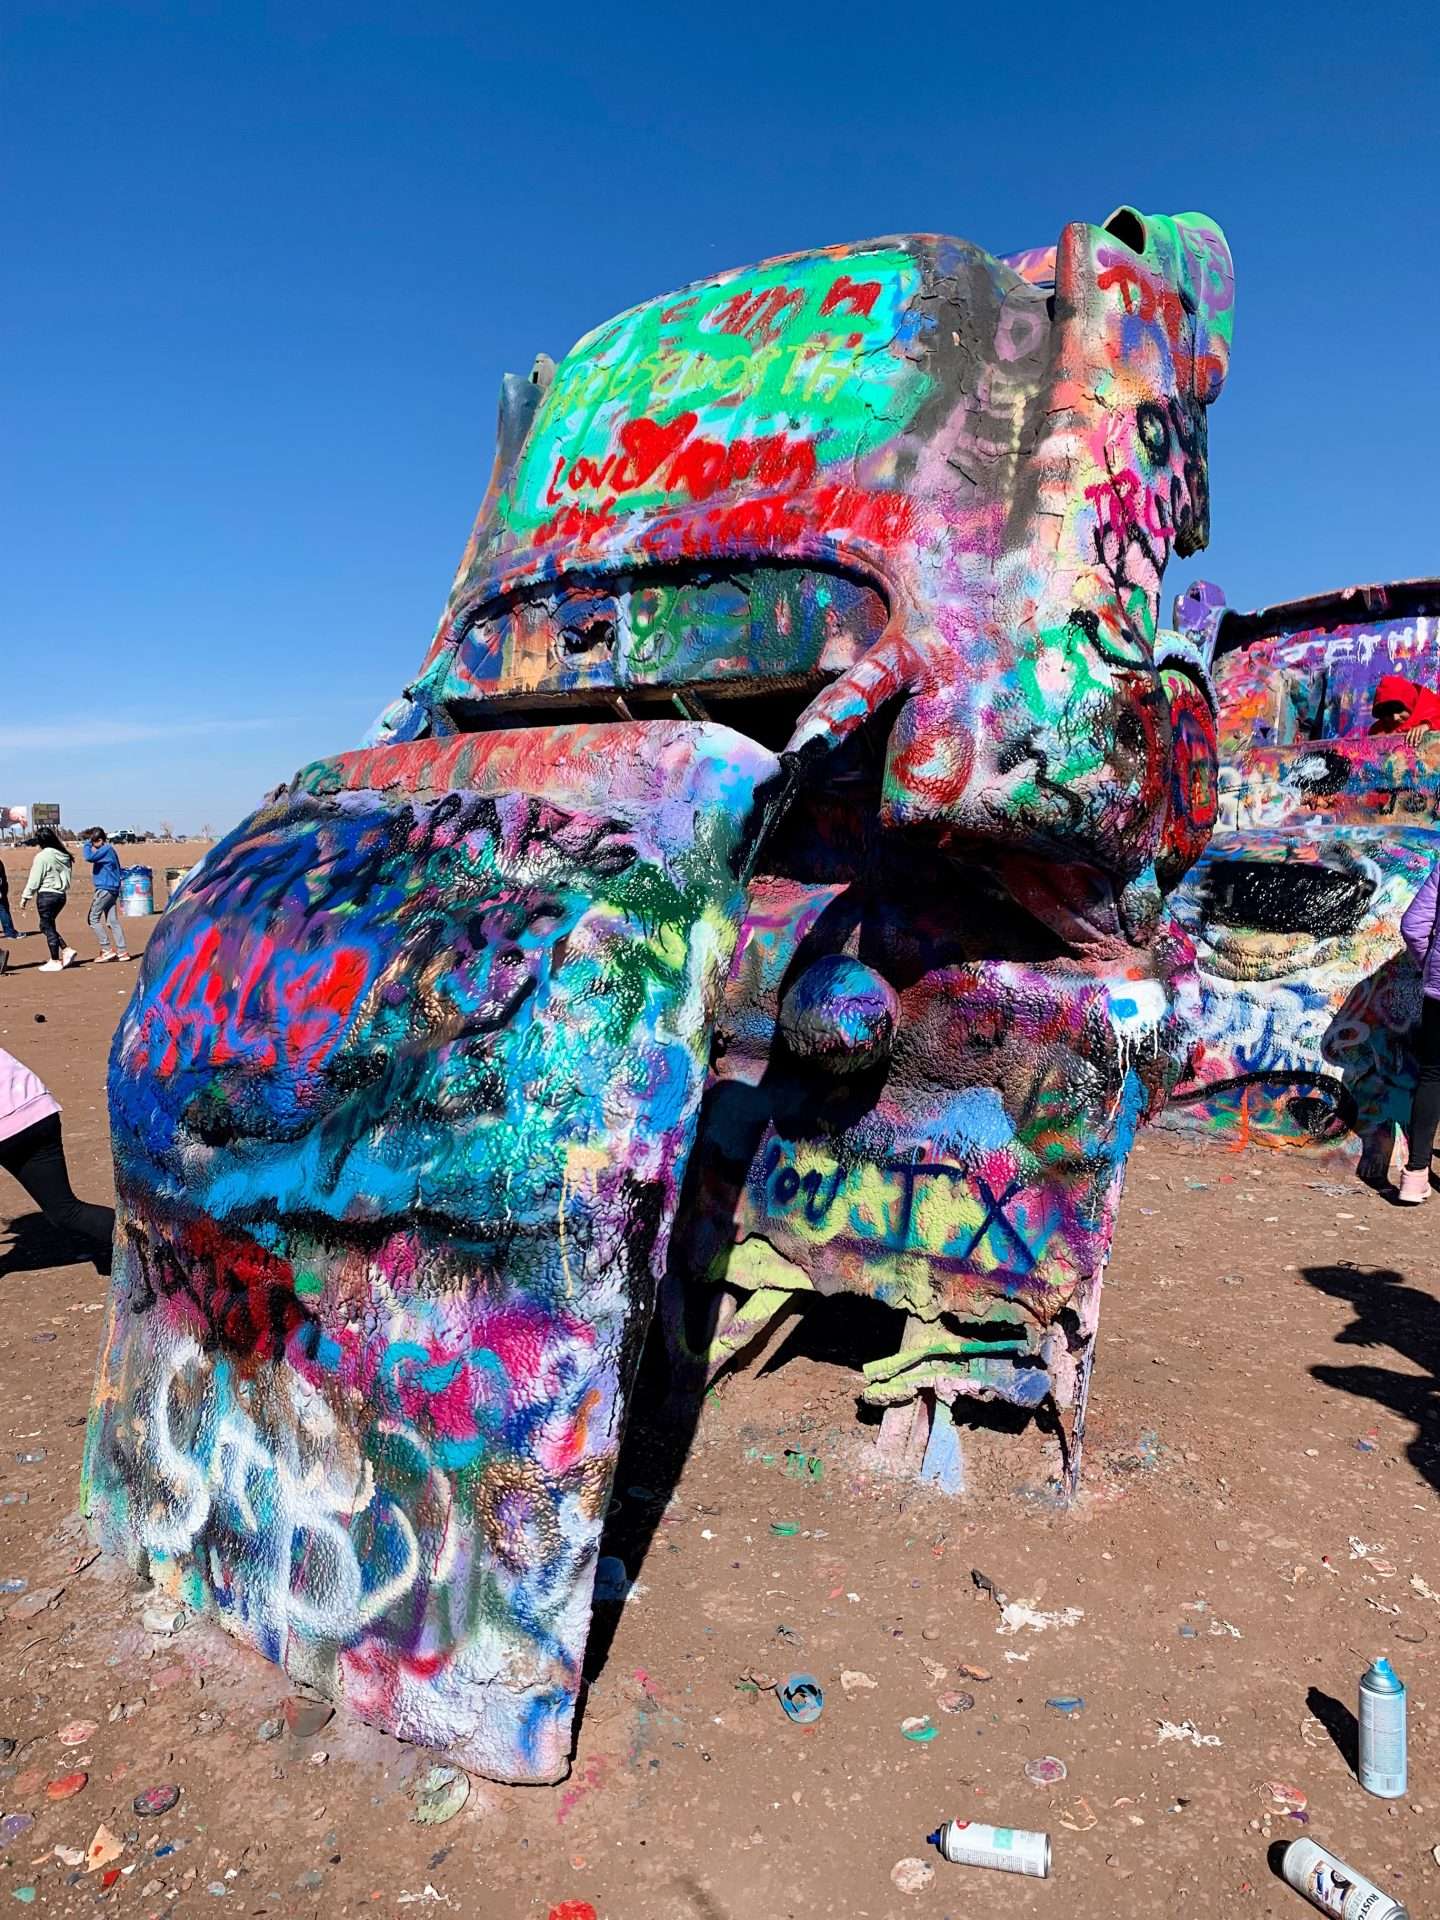 One of the 10 cars at Cadillac Ranch in Texas.